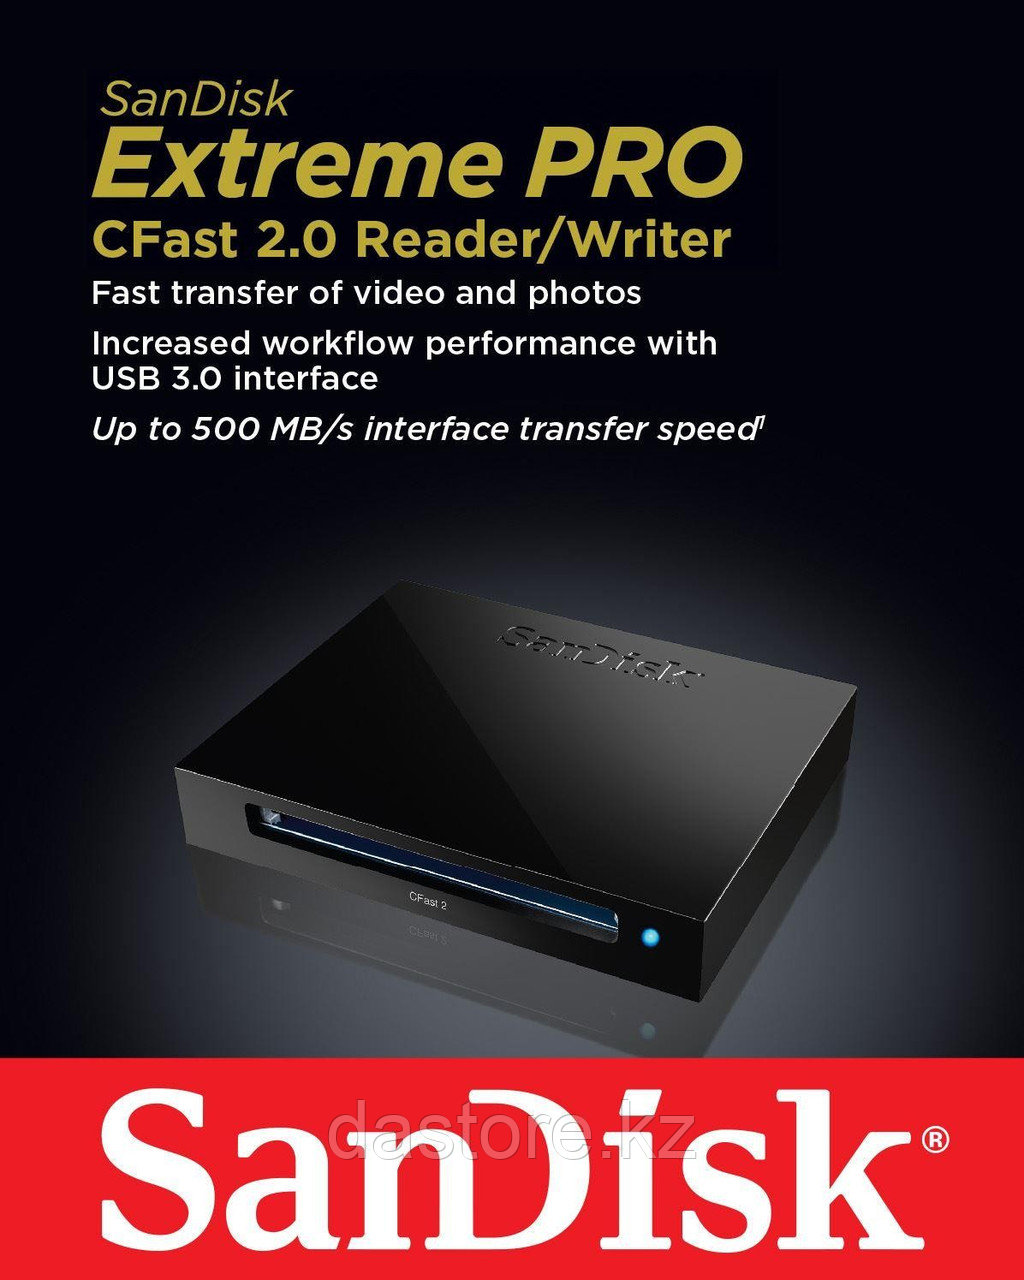 SanDisk EXTREME PRO C-FAST cfast card reader - фото 2 - id-p35396351